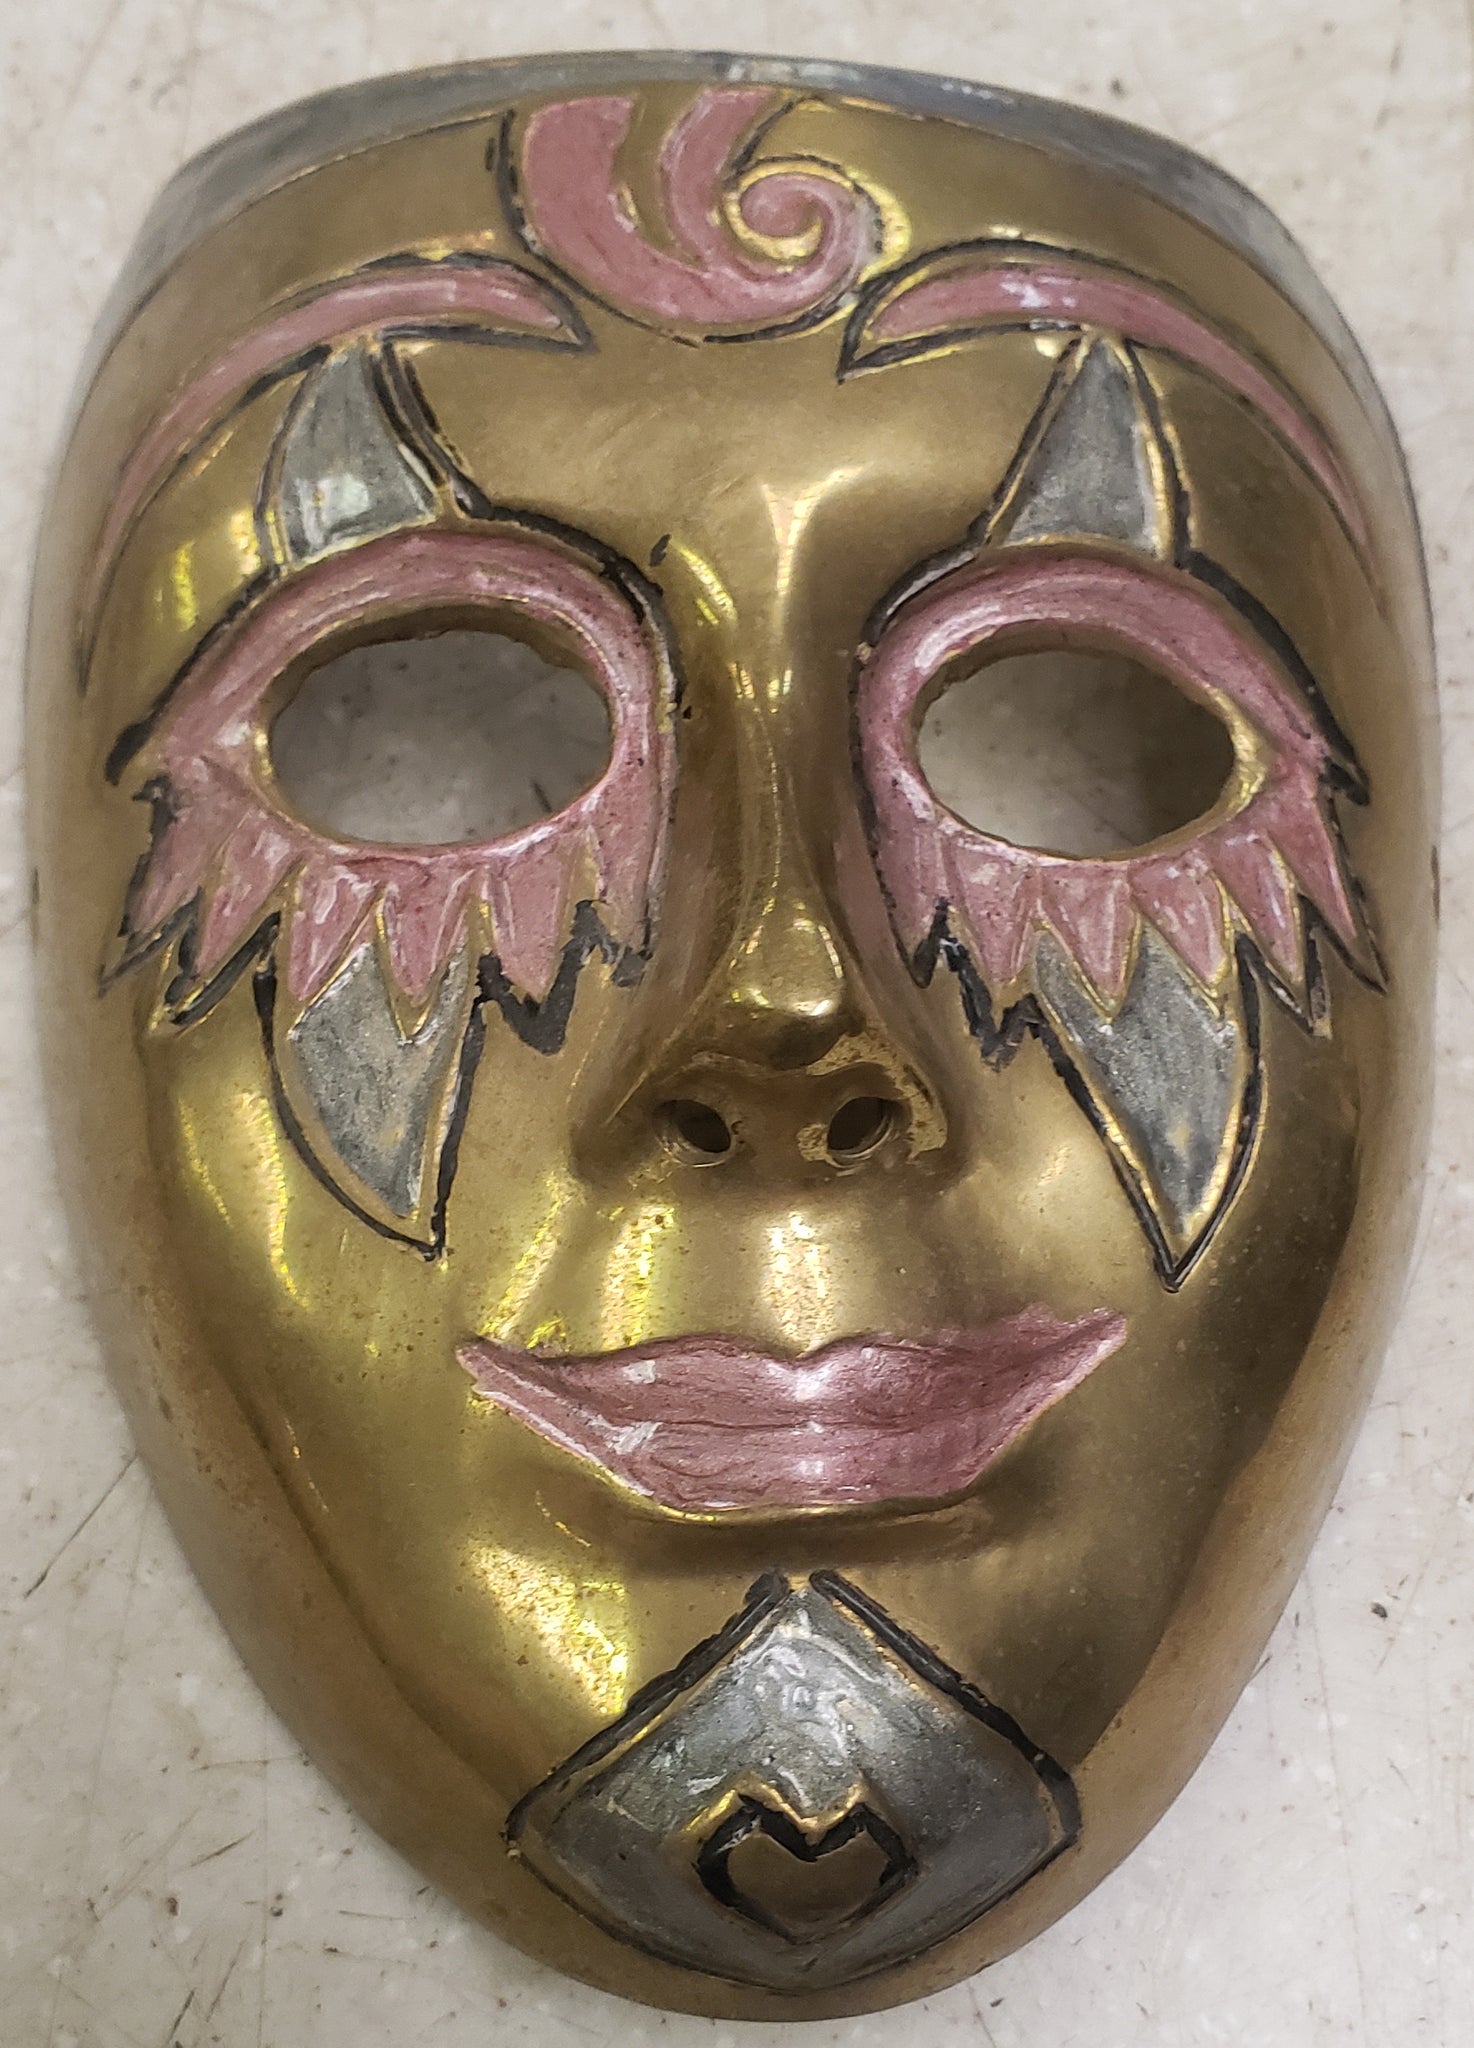 Vintage Remco Decorative Metal Mask - Made in India (5-3/4 x 4-1